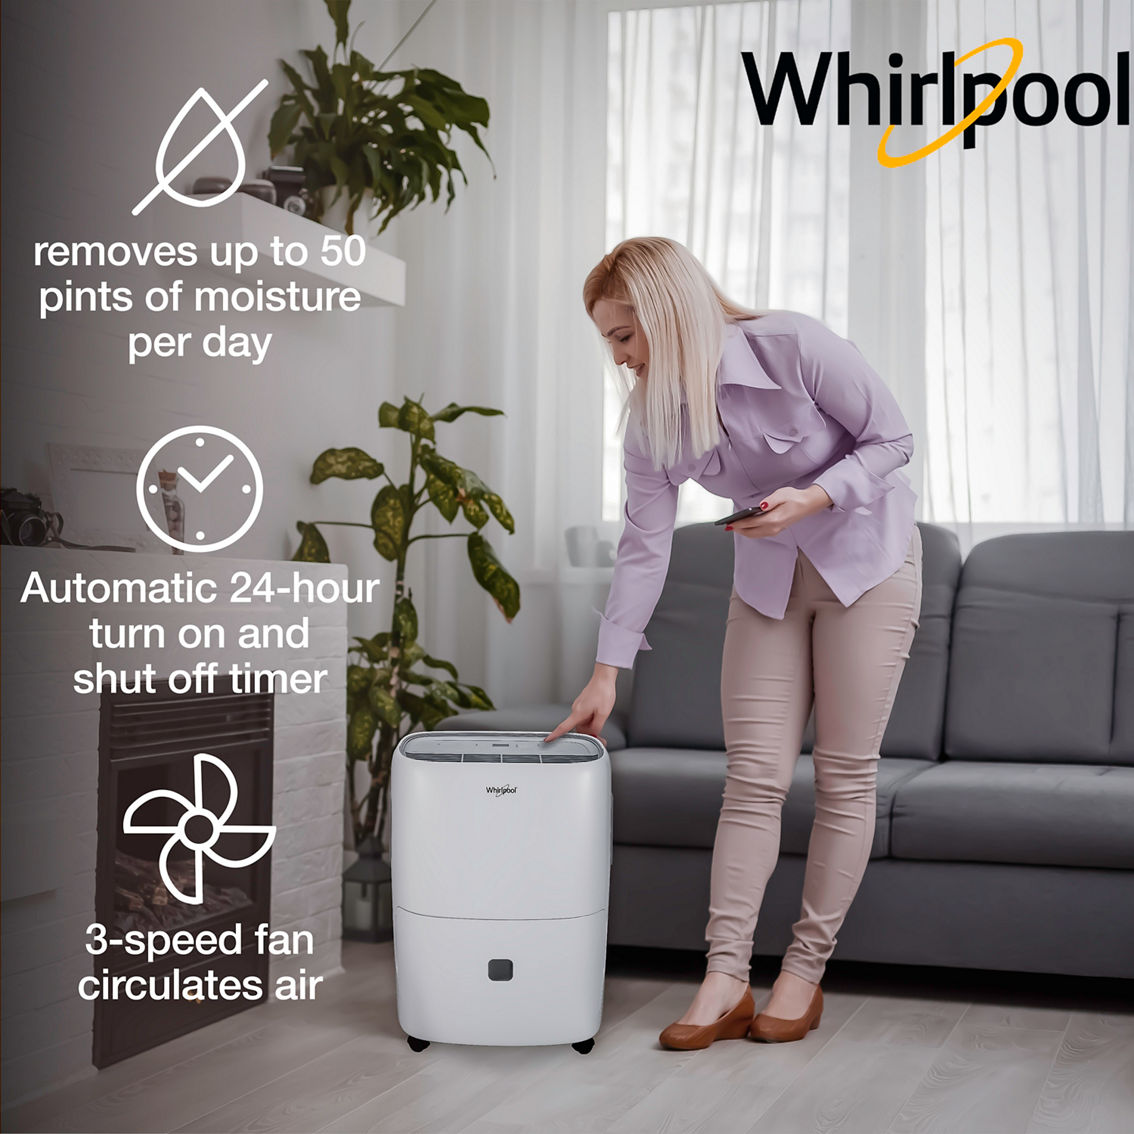 Whirlpool 50 pt. Dehumidifier with Pump - Image 6 of 6